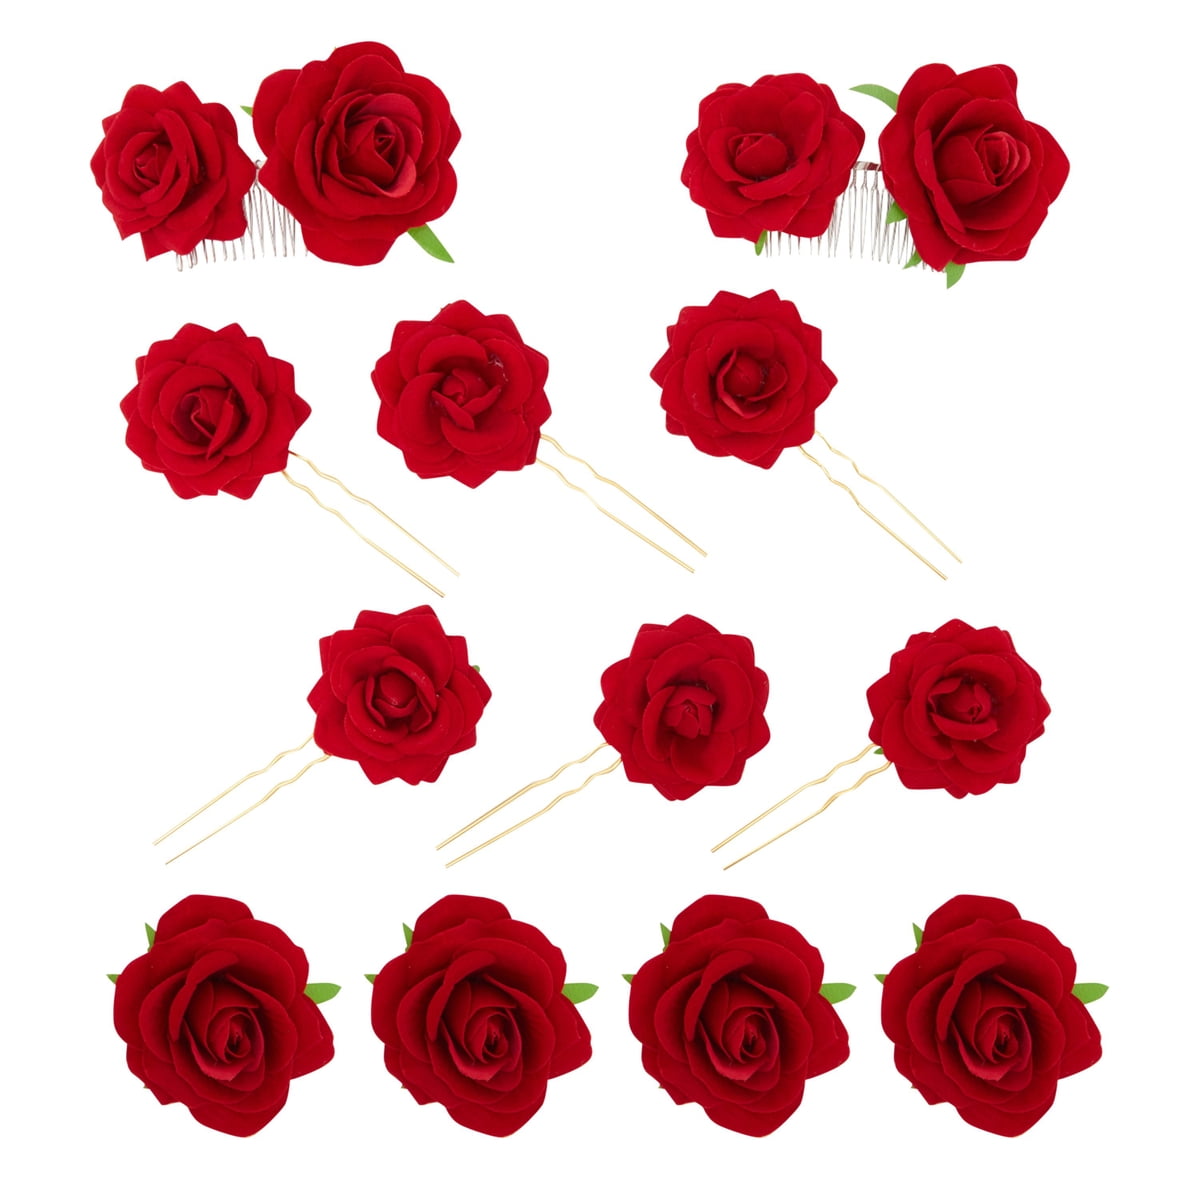 20 NEW LEGO Friends Accessories Flower with 7 Thick Petals and Pin Red